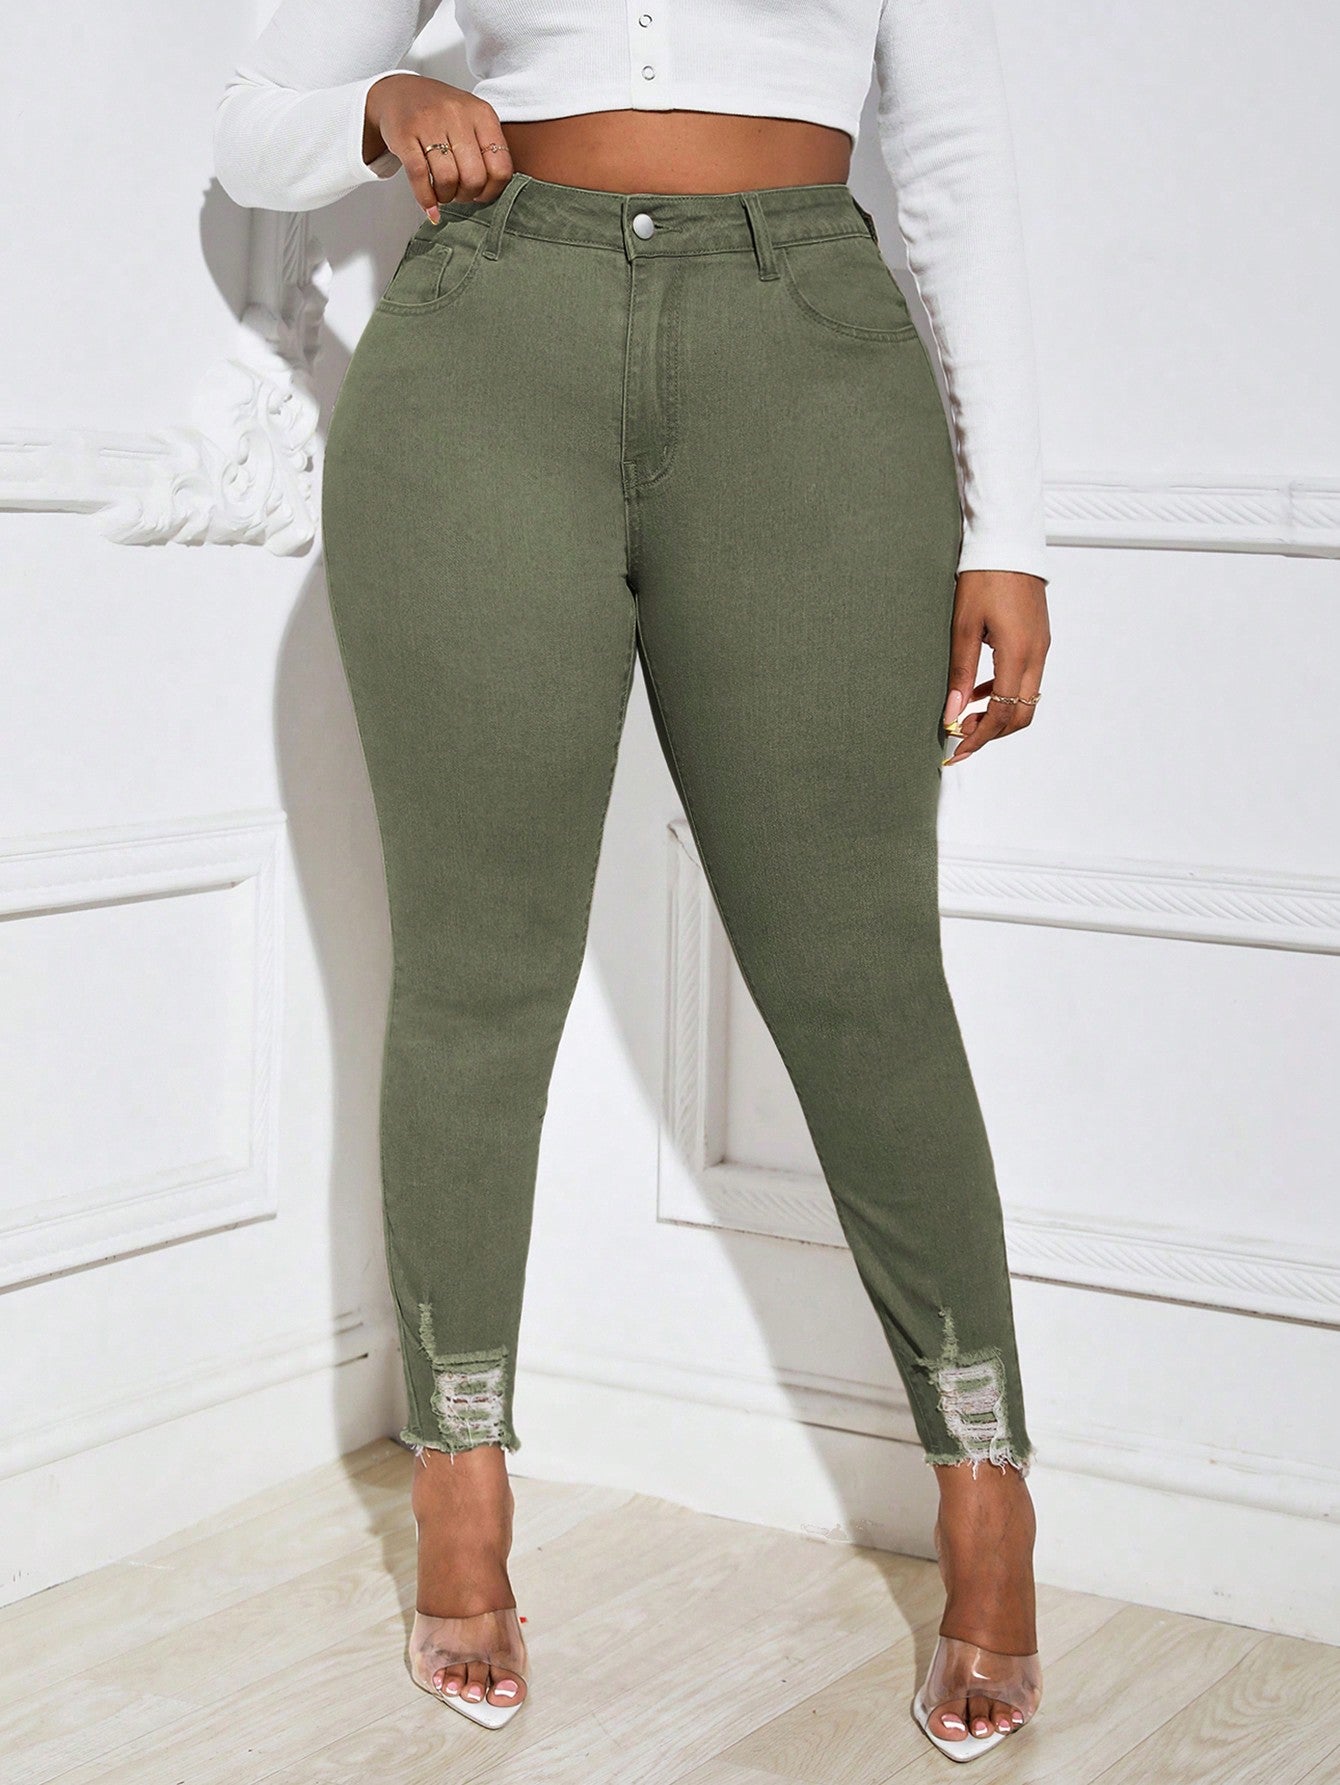 Plus Size Tight-Fitting Jeans With Frayed Hem